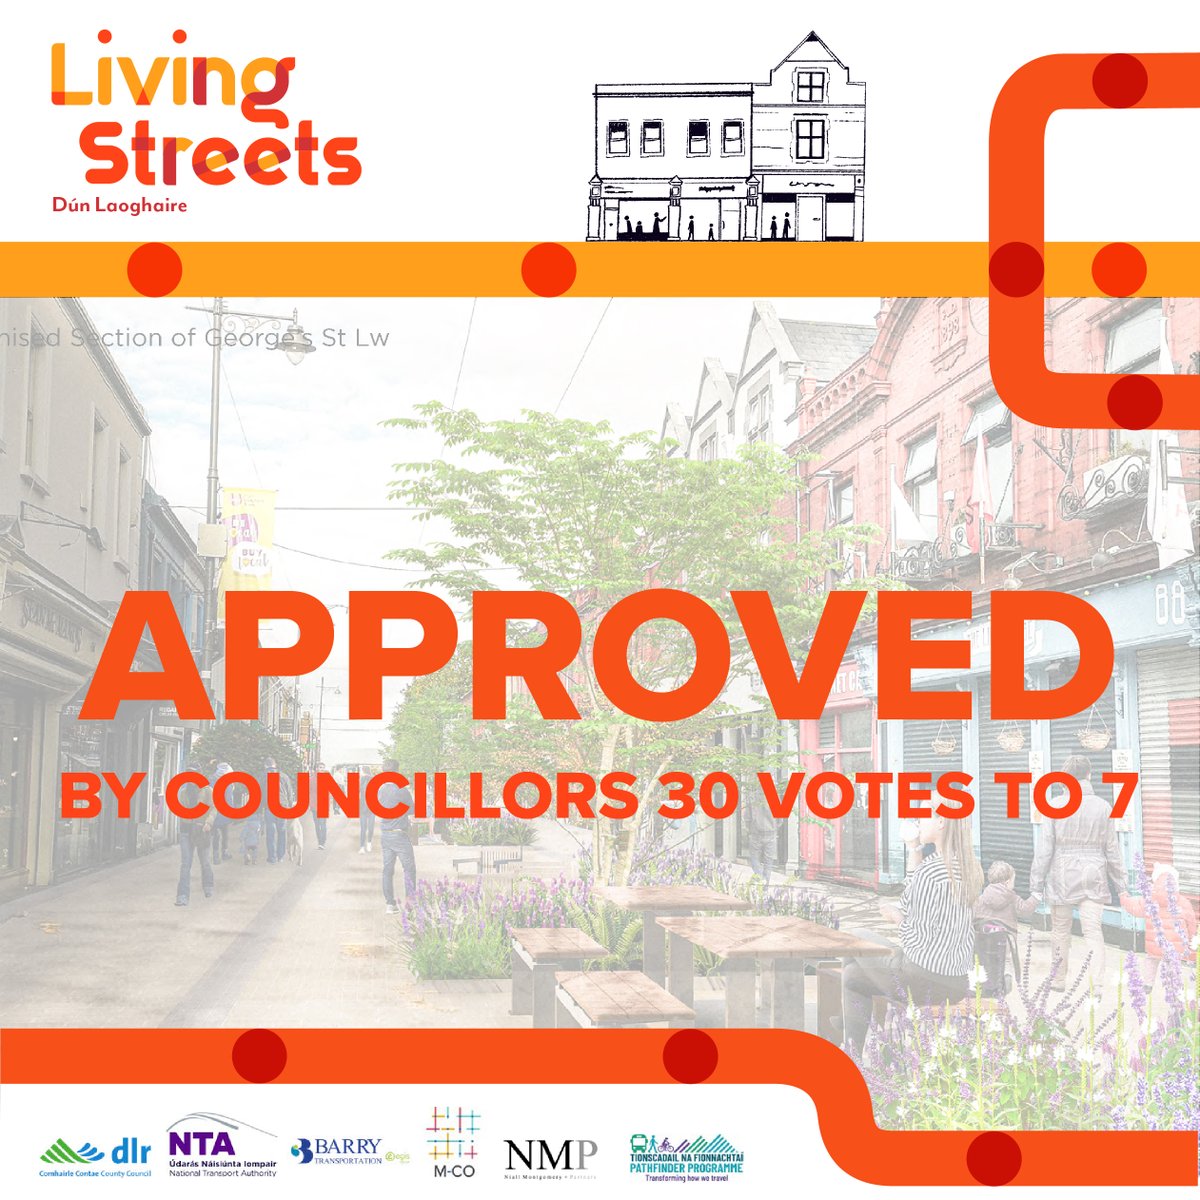 #LivingStreets Dún Laoghaire passed yesterday by Councillors, 30-7. M-CO were proud to manage the consultation for this Part 8 Pathfinder Project which is an exemplar of local action for healthy communities and climate. Thanks to @jbbarryeng, and to @dlrcc for their leadership.